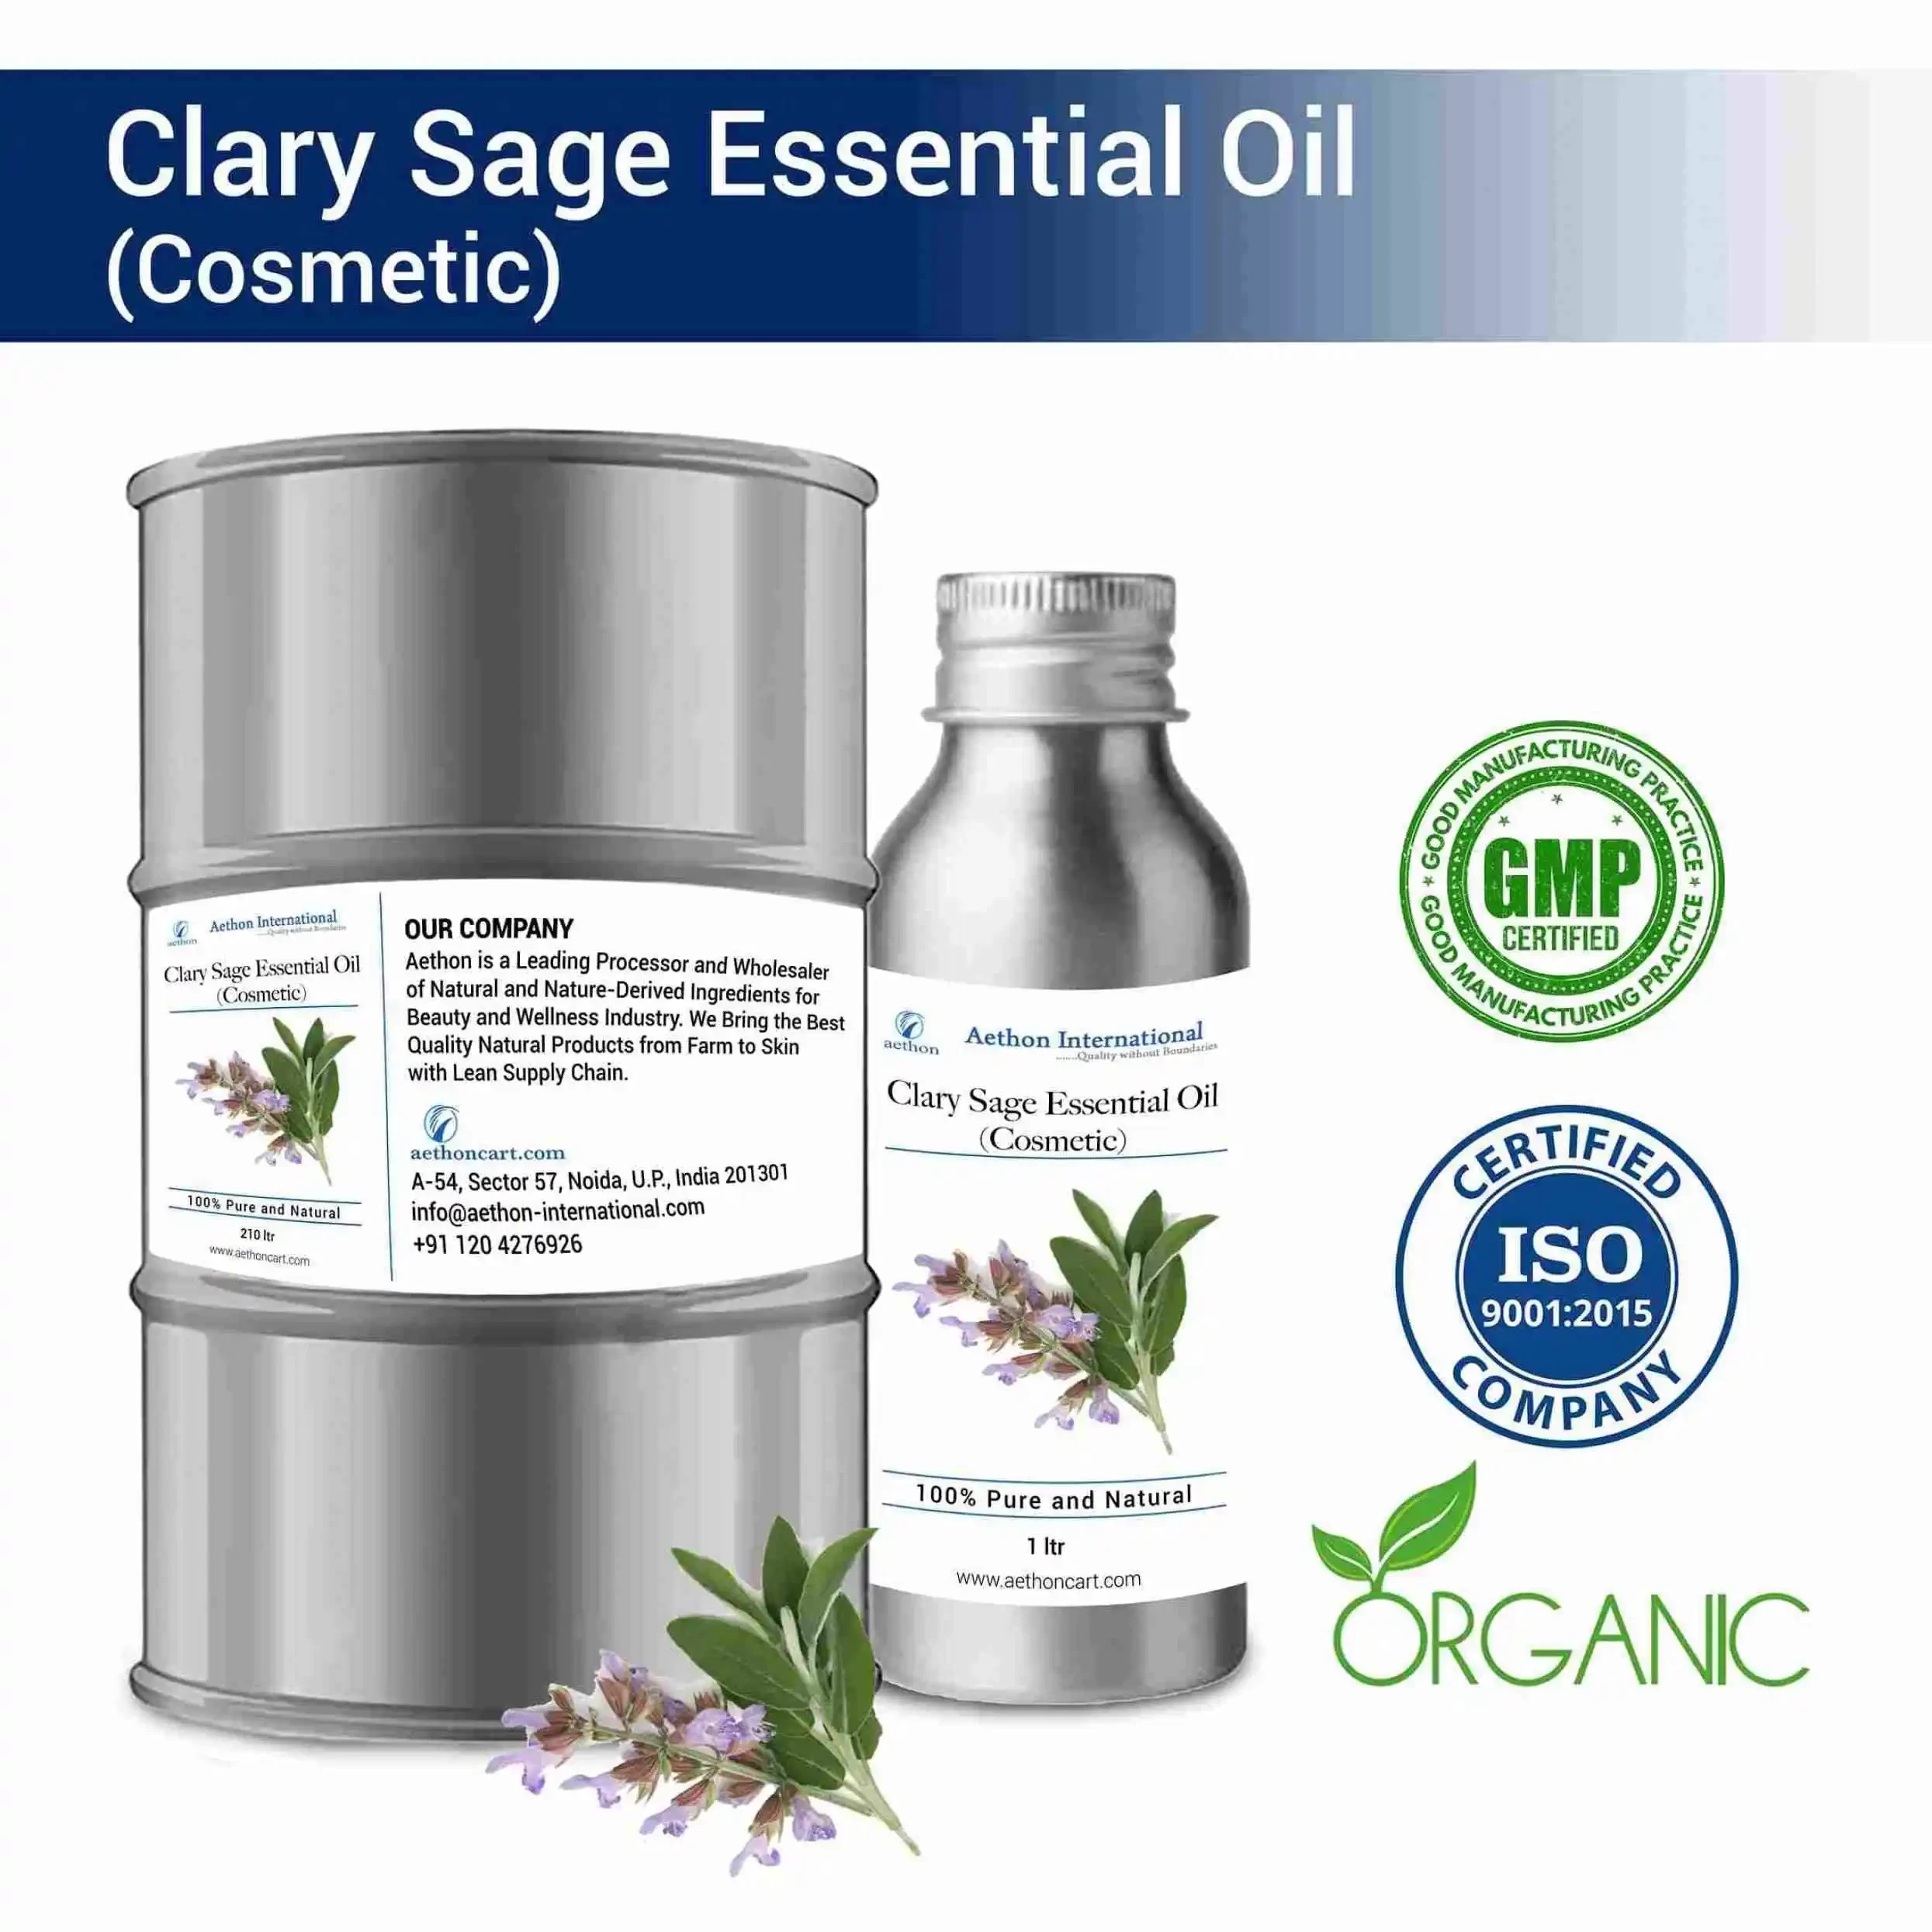 Clary Sage Essential Oil (Cosmetic)